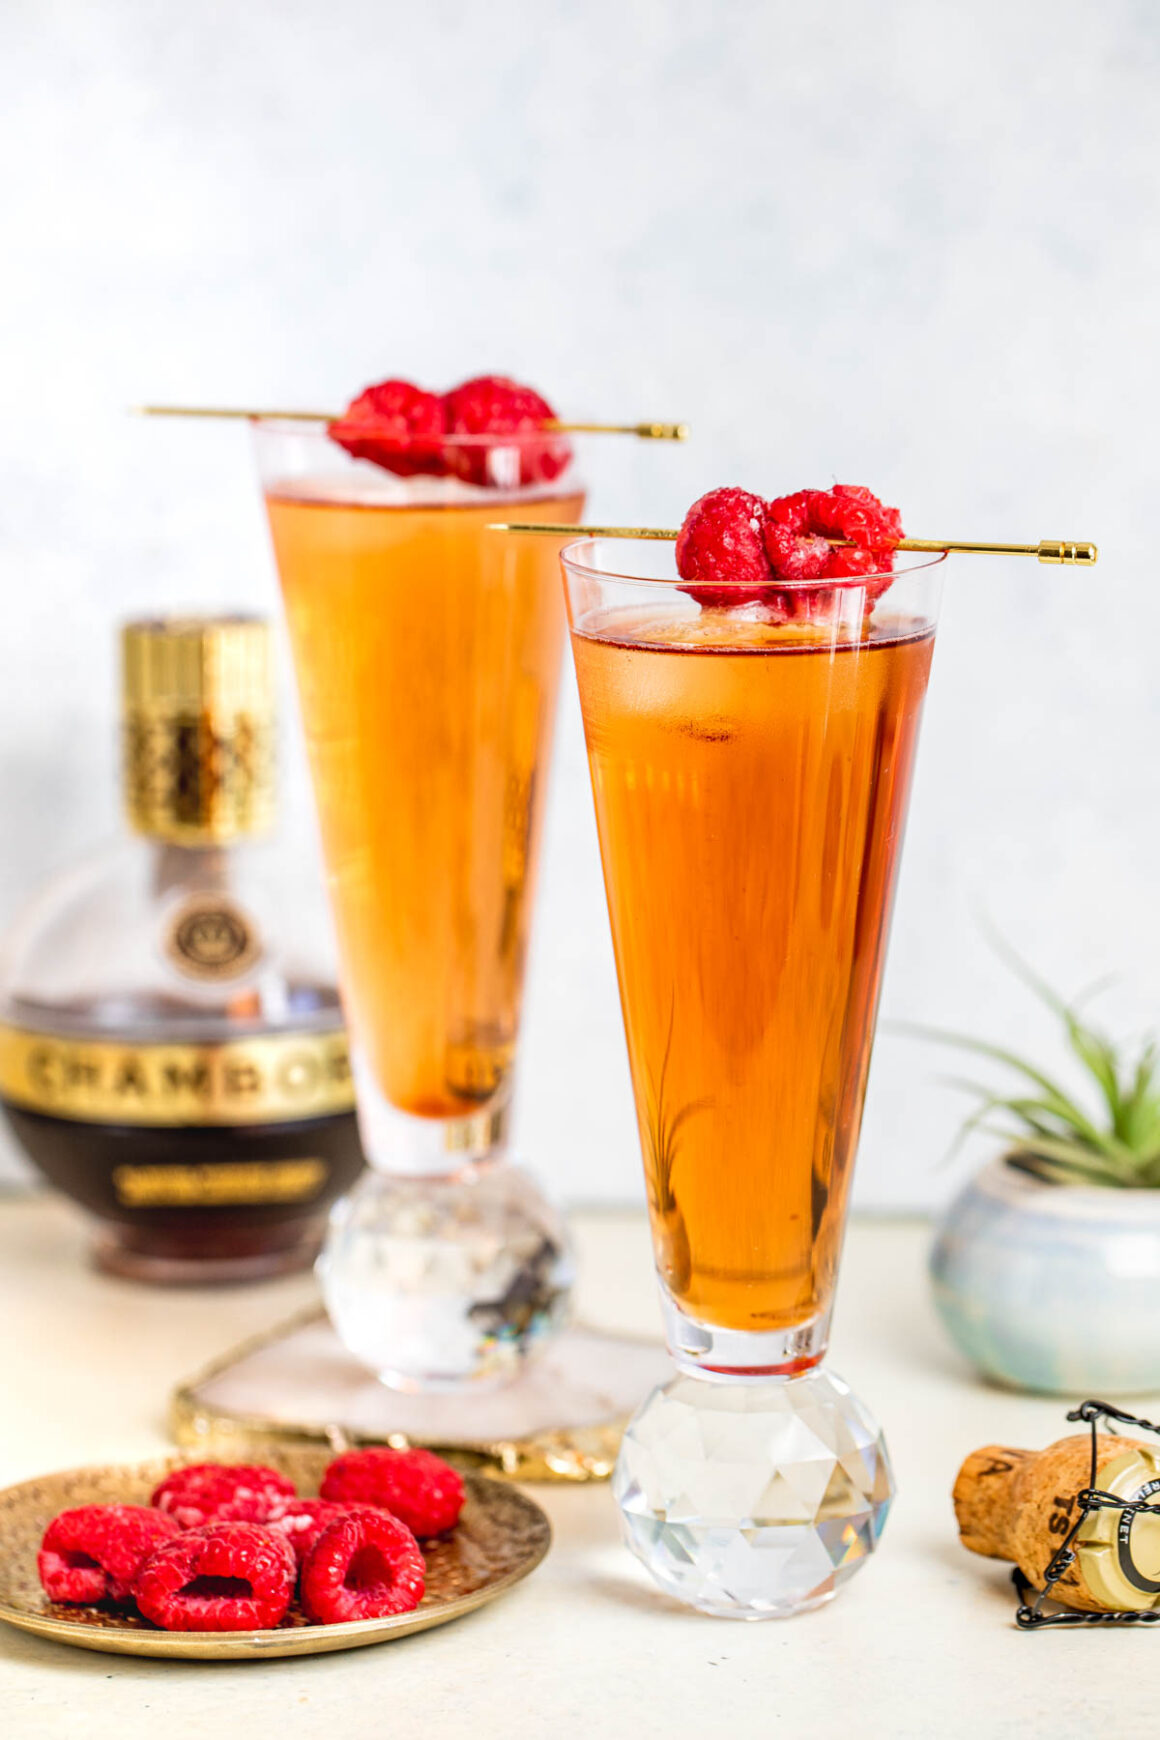 The Kir Royal is an exquisite champagne cocktail that effortlessly combines the freshness of sparkling wine with the fruity intensity.